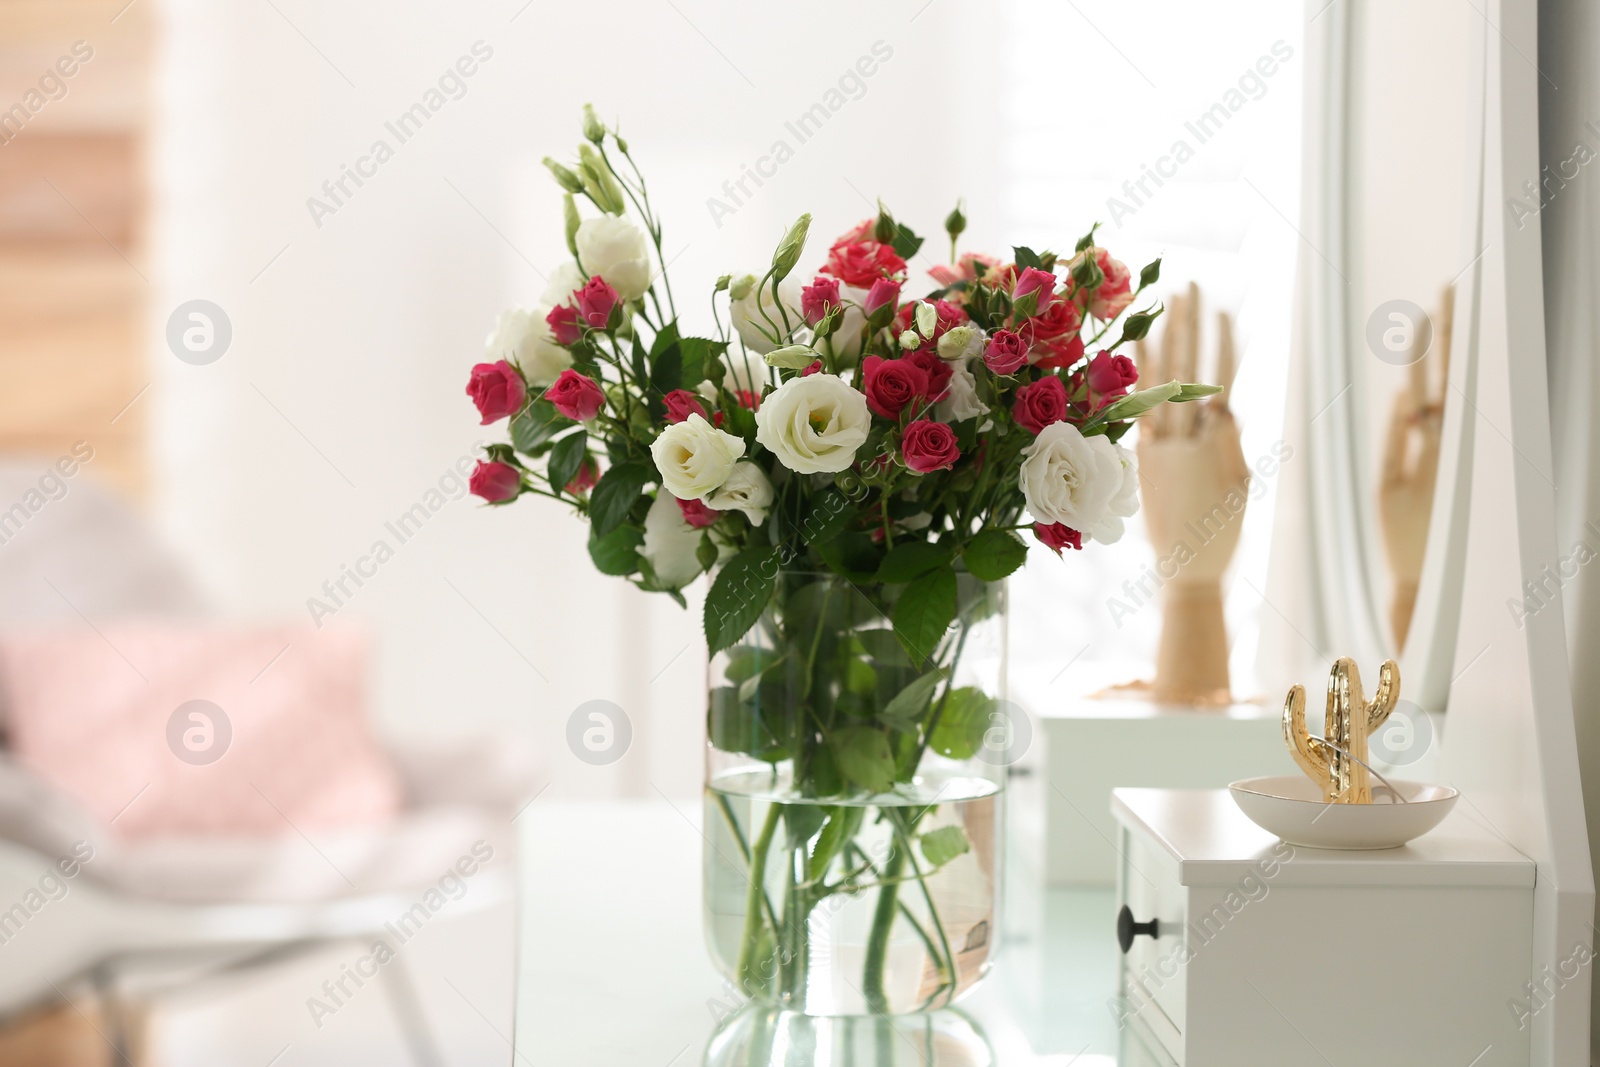 Photo of Glass vase with fresh flowers on dressing table indoors